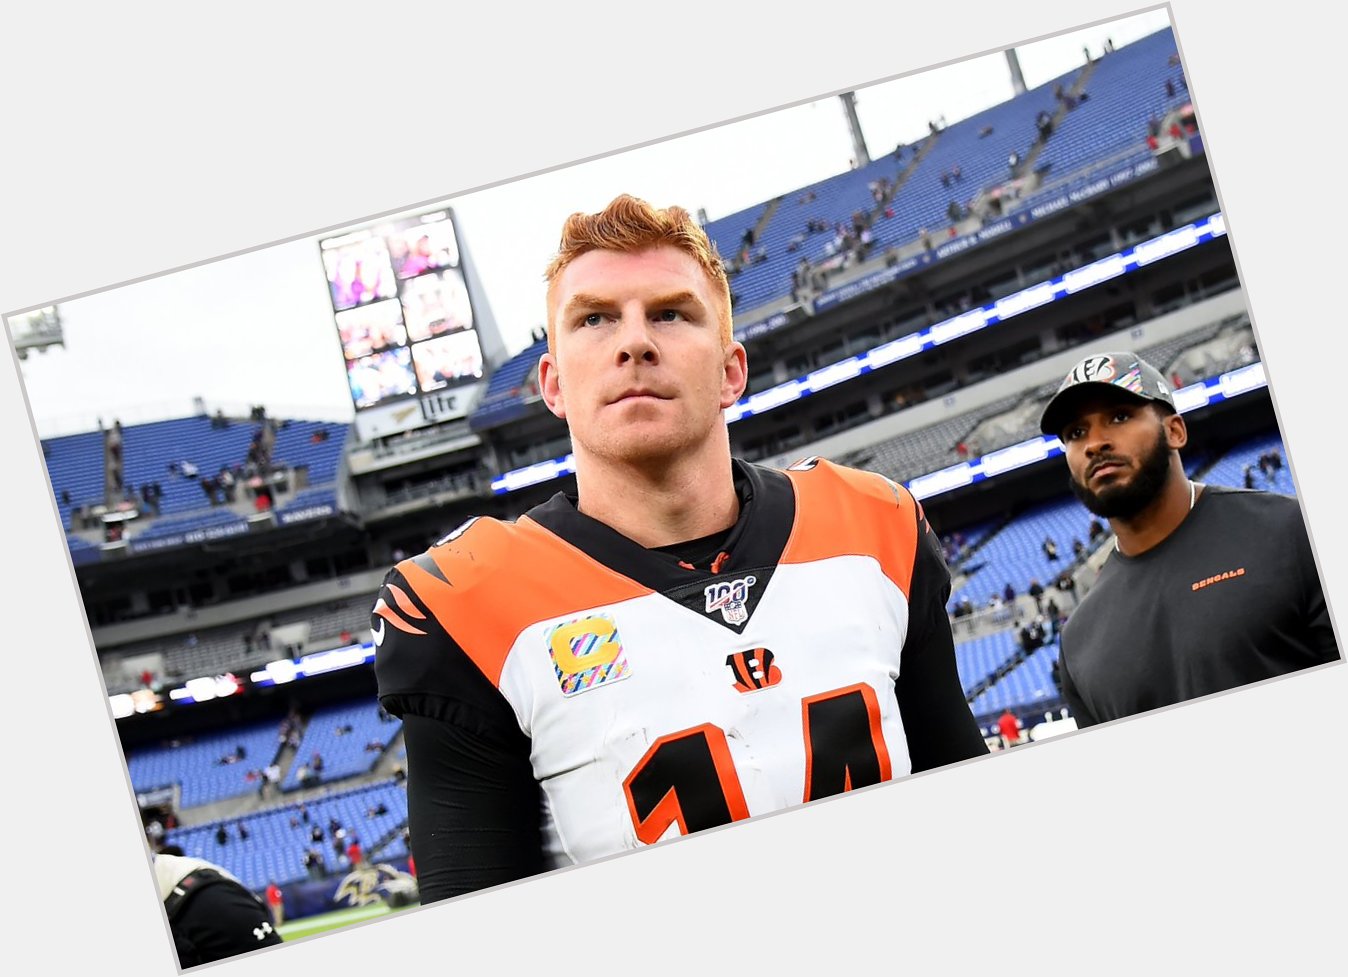 It\s Andy Dalton\s birthday.

The just benched him, per Happy birthday? 